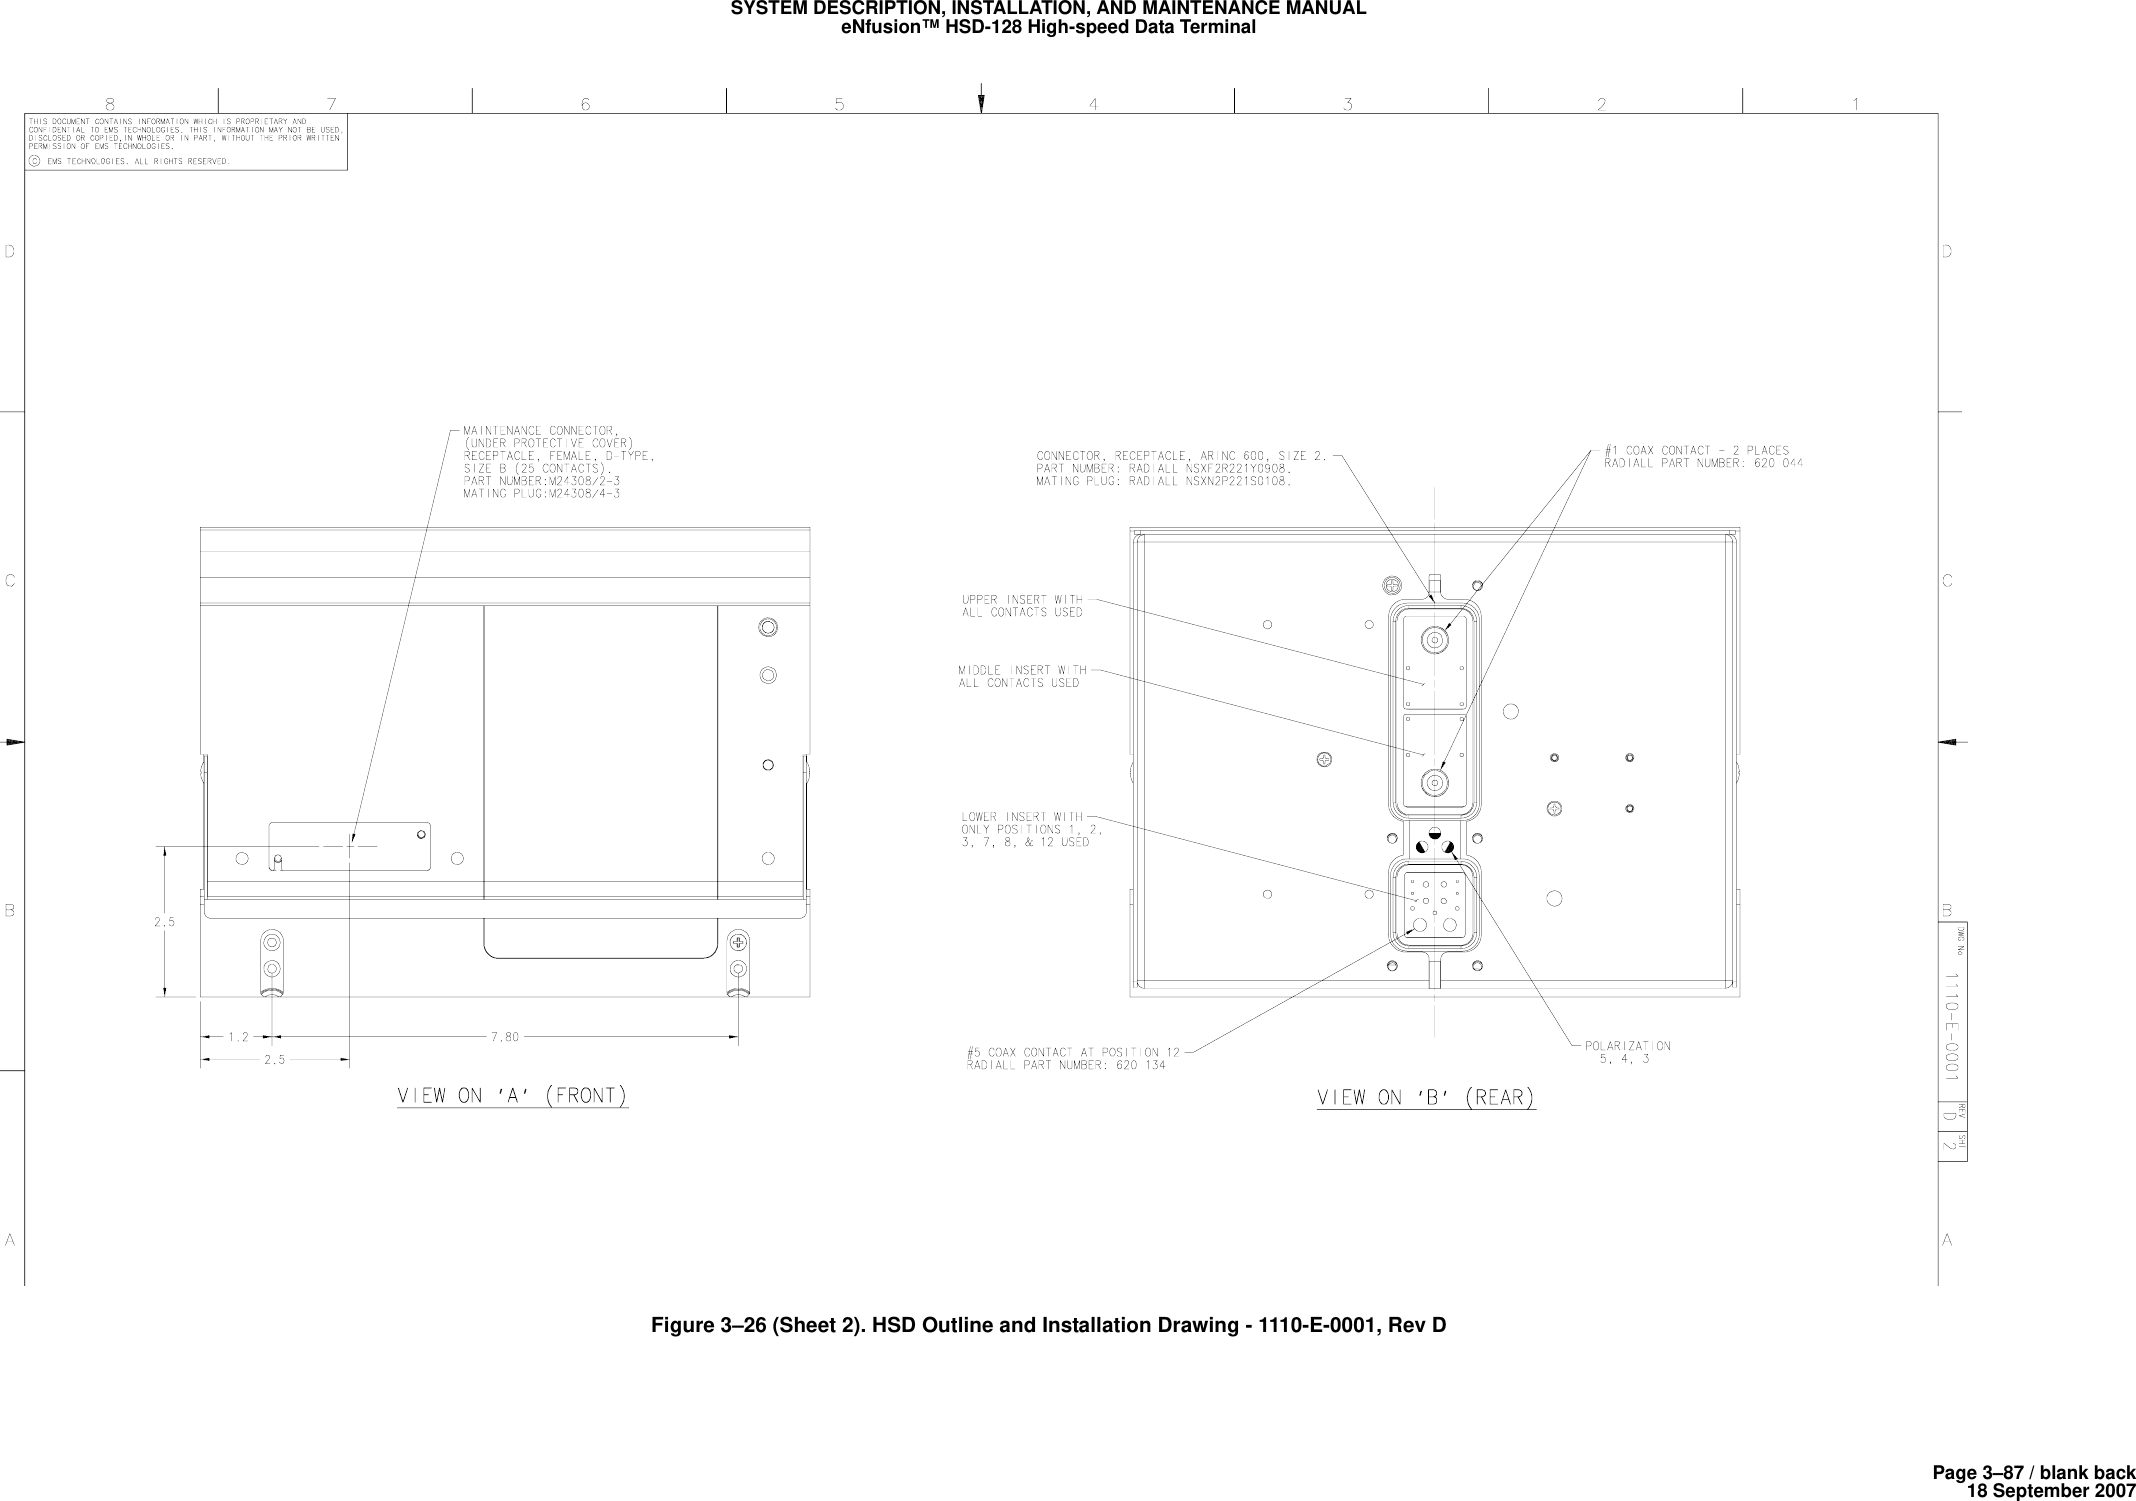 Page 3–87 / blank back18 September 2007SYSTEM DESCRIPTION, INSTALLATION, AND MAINTENANCE MANUALeNfusion™ HSD-128 High-speed Data TerminalFigure 3–26 (Sheet 2). HSD Outline and Installation Drawing - 1110-E-0001, Rev D